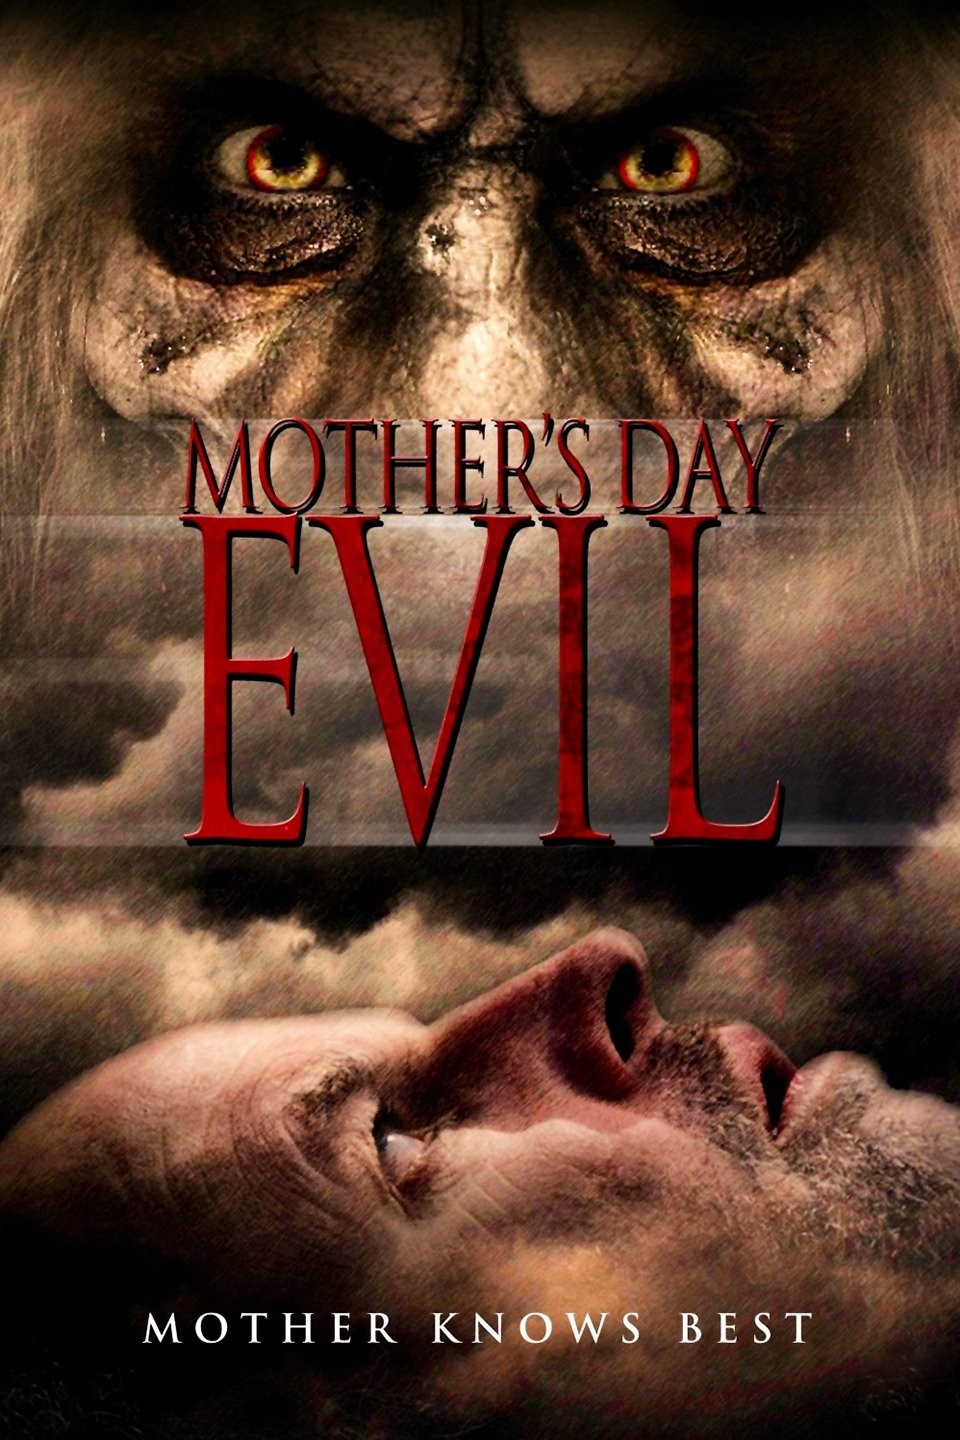 Mother's Day Evil | Rotten Tomatoes